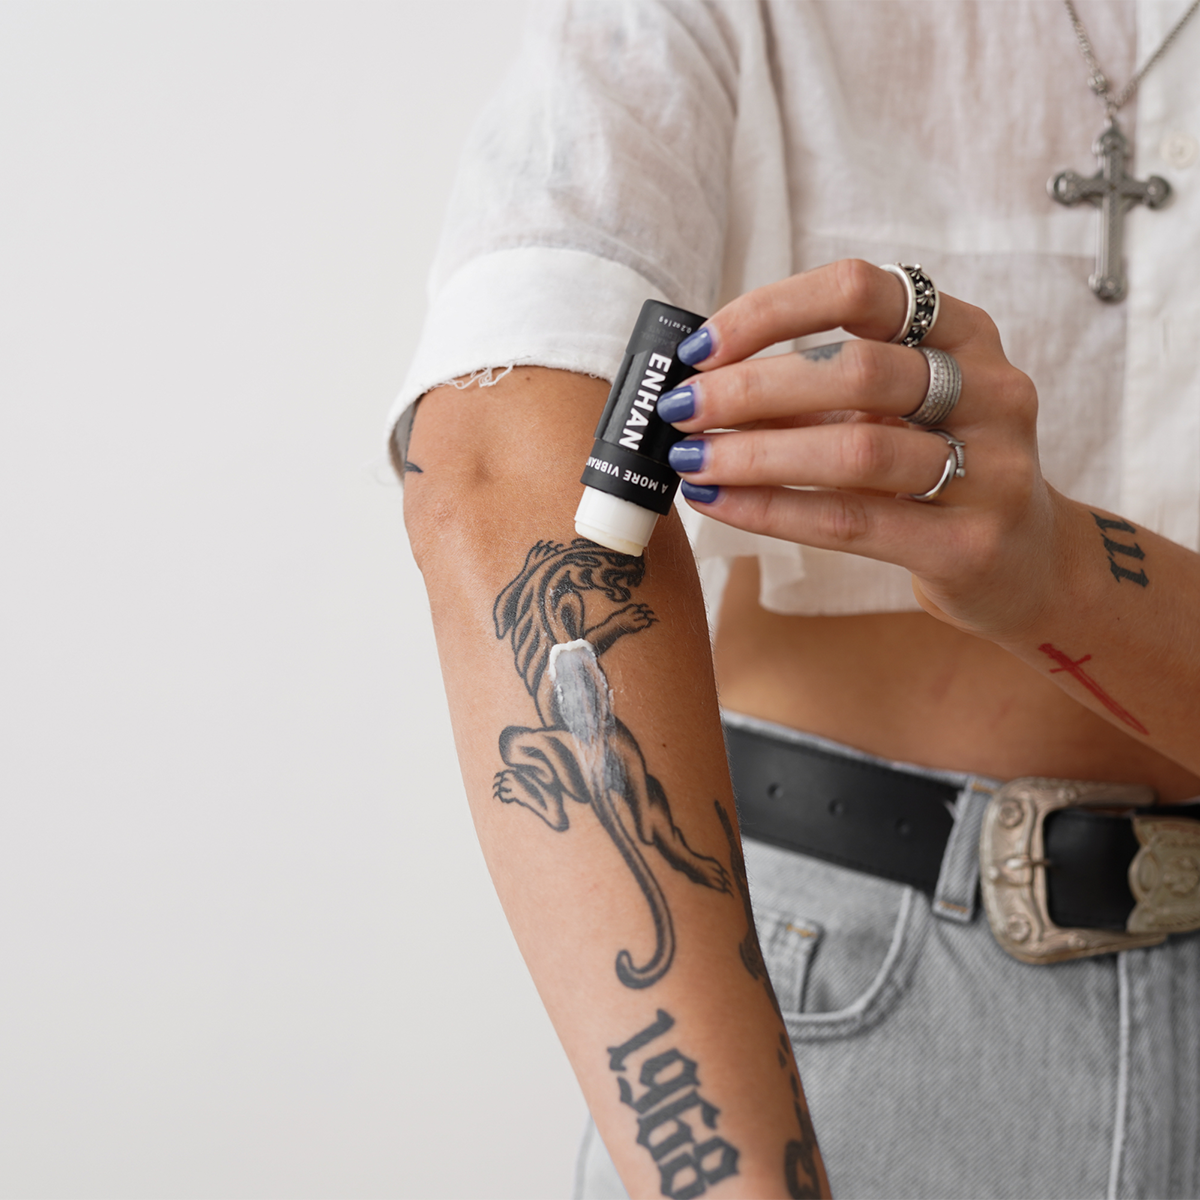 Mad Rabbit after-care tattoo brand inks $10 million in new funding - Glossy